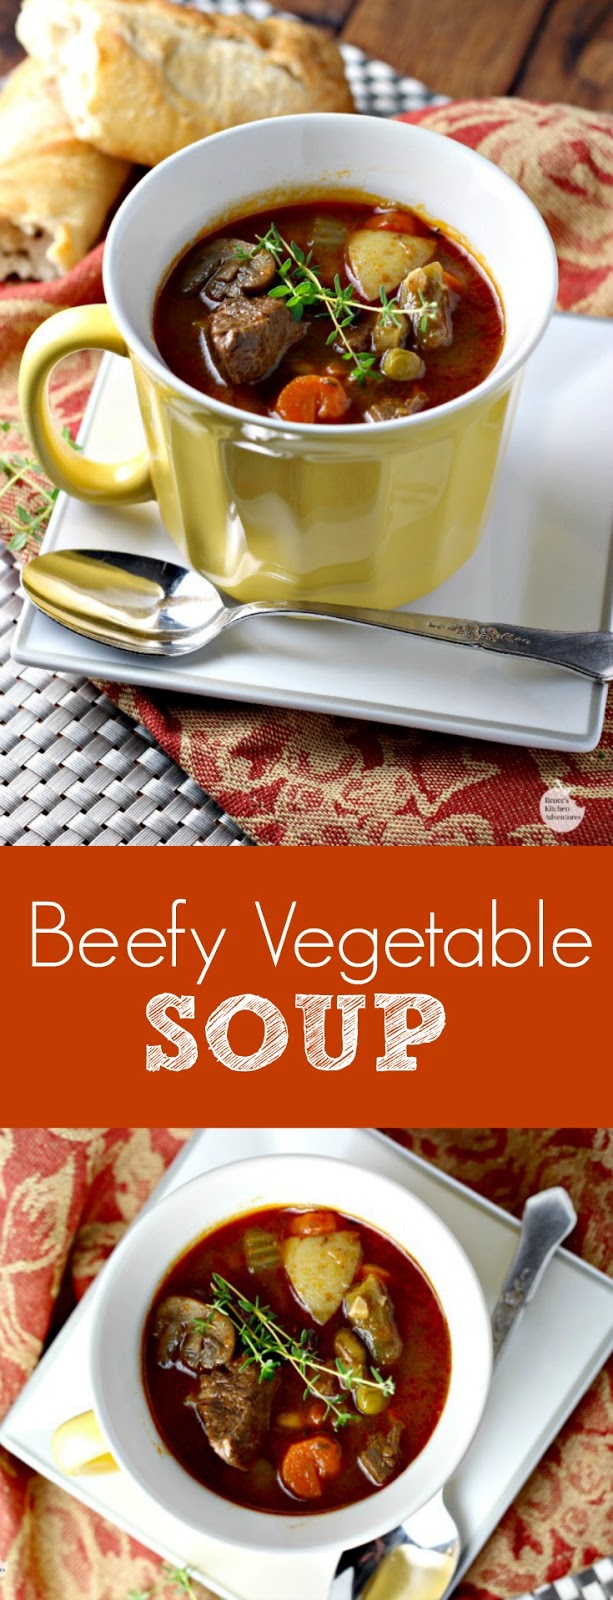 Beefy Vegetable Soup | by Renee's Kitchen Adventures - easy recipe for classic beef vegetable soup full of veggies with a rich broth